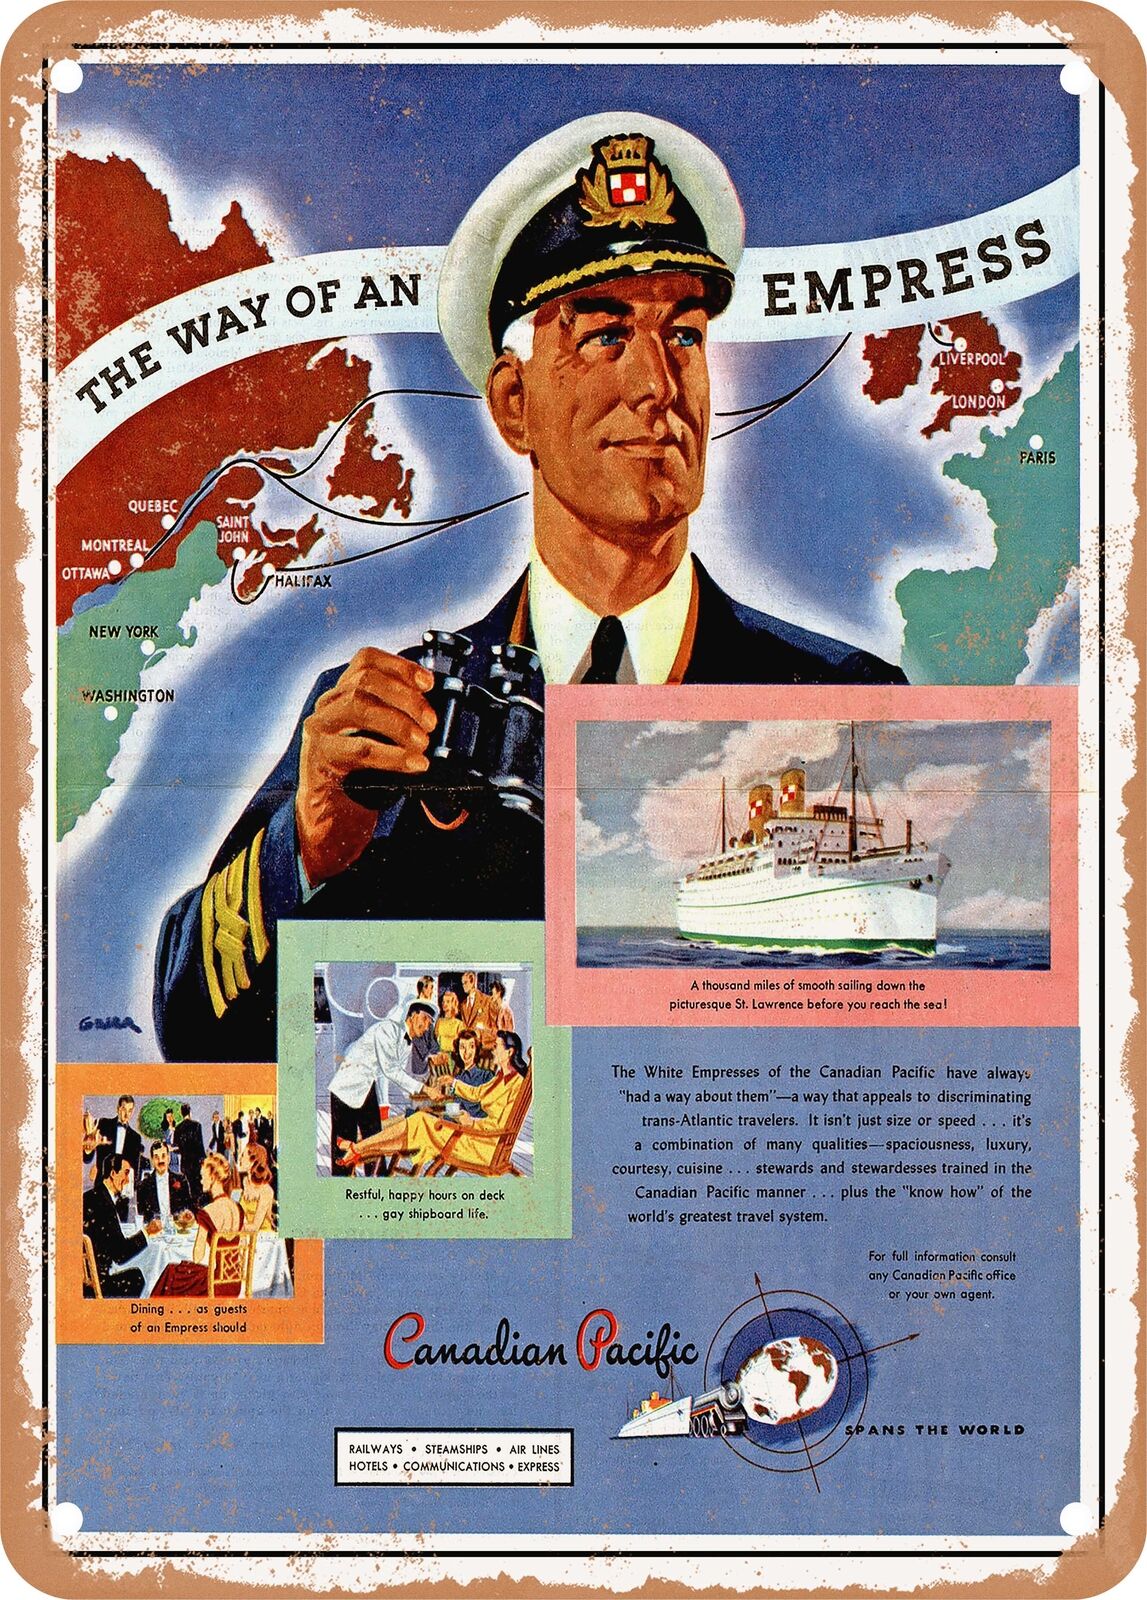 METAL SIGN - 1947 The Way of an Empress Canadian Pacific Vintage Ad